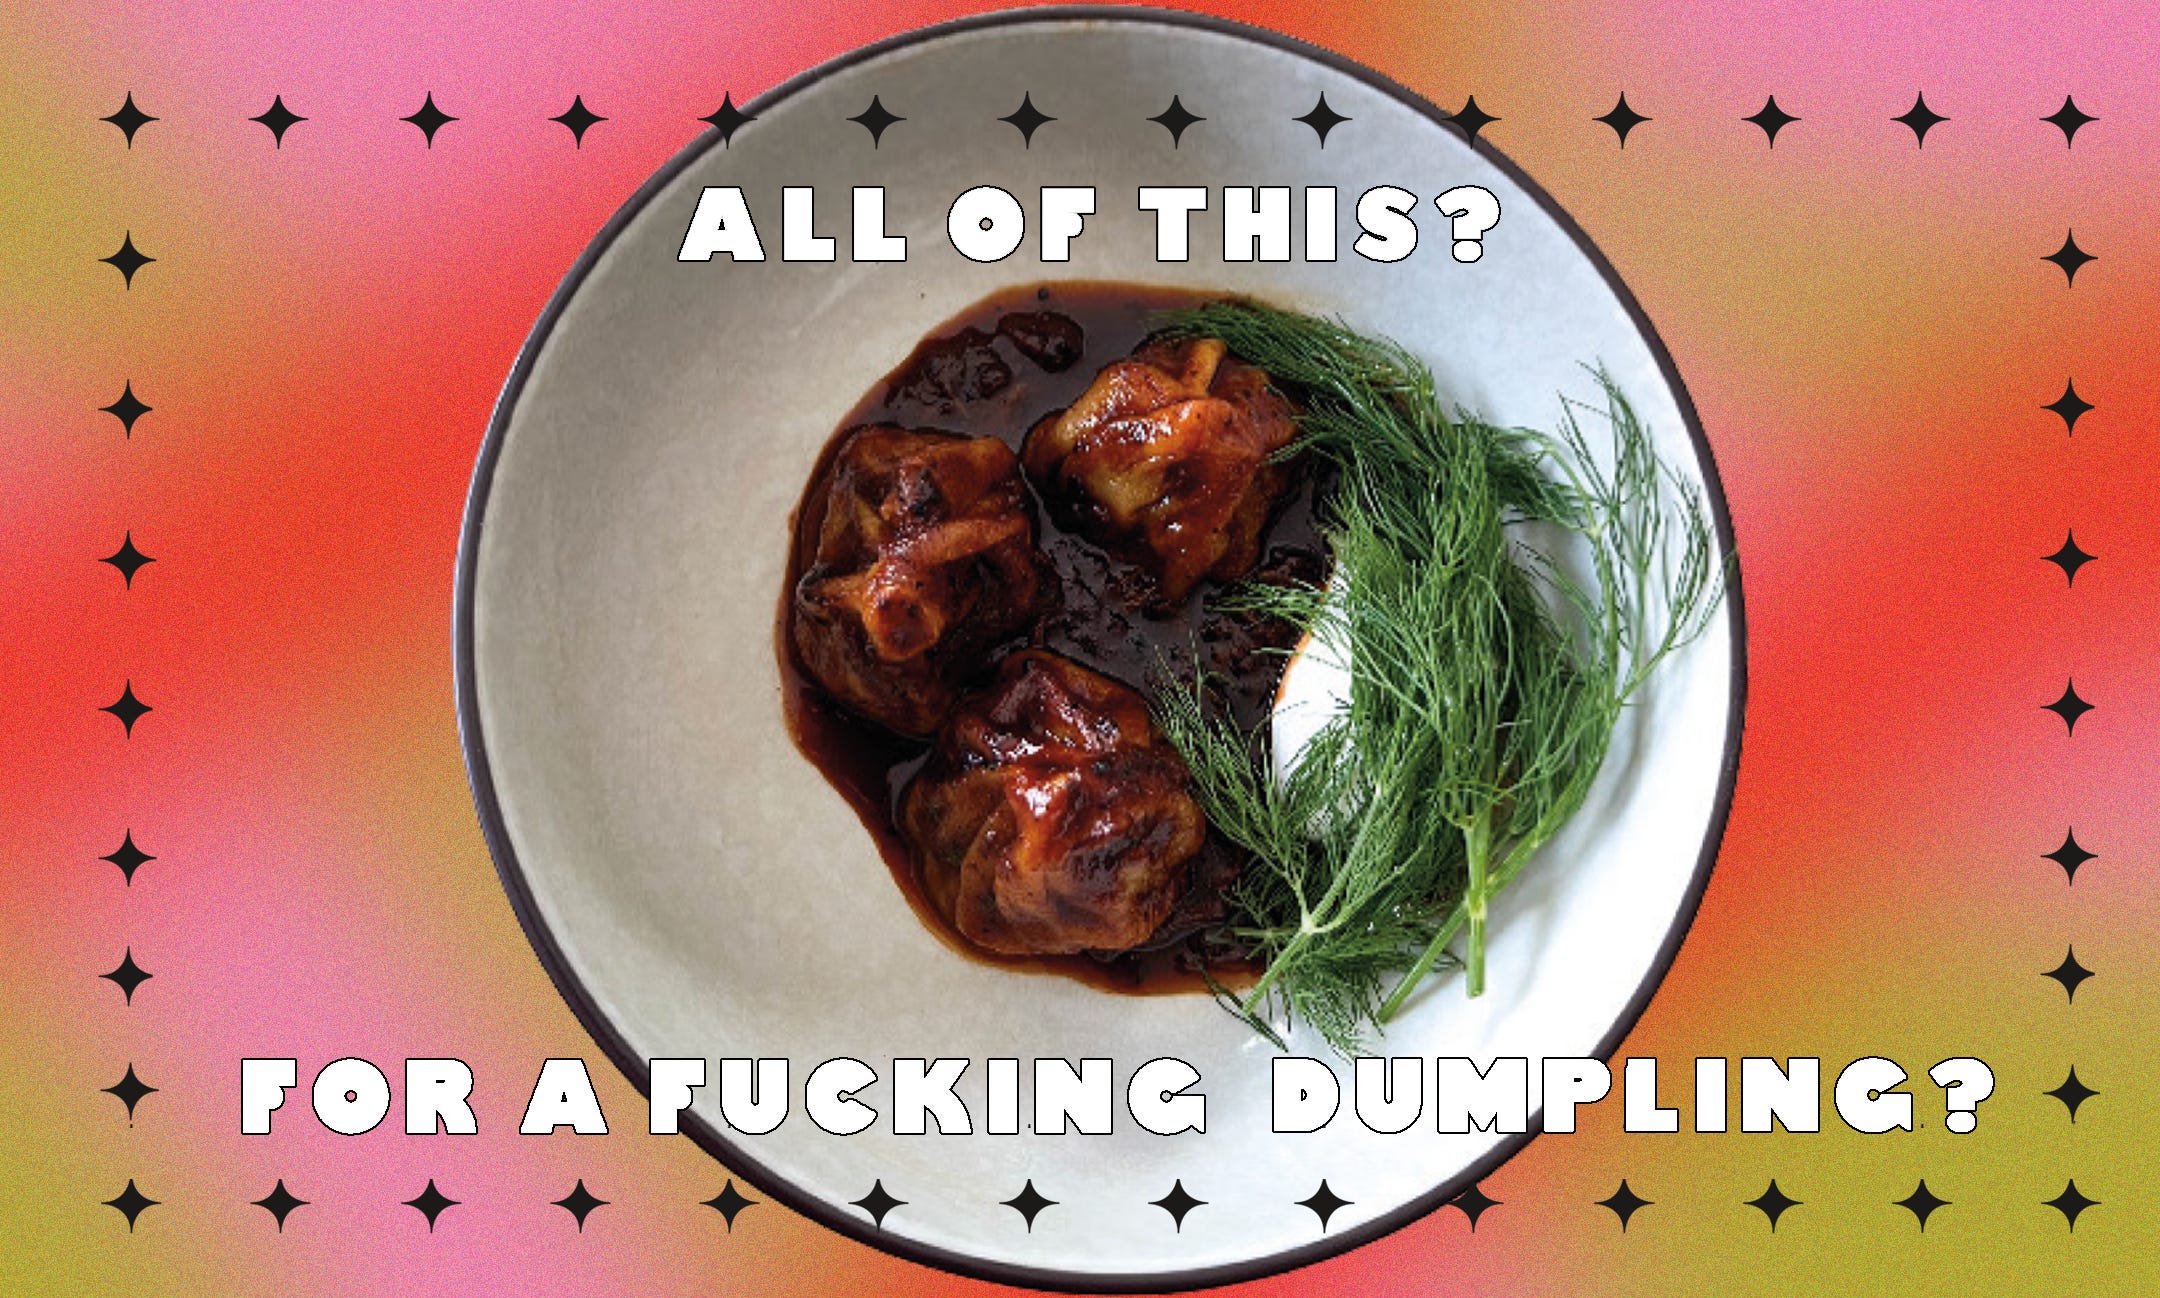 Saucy pig head khinkali are on a plate along with the headline